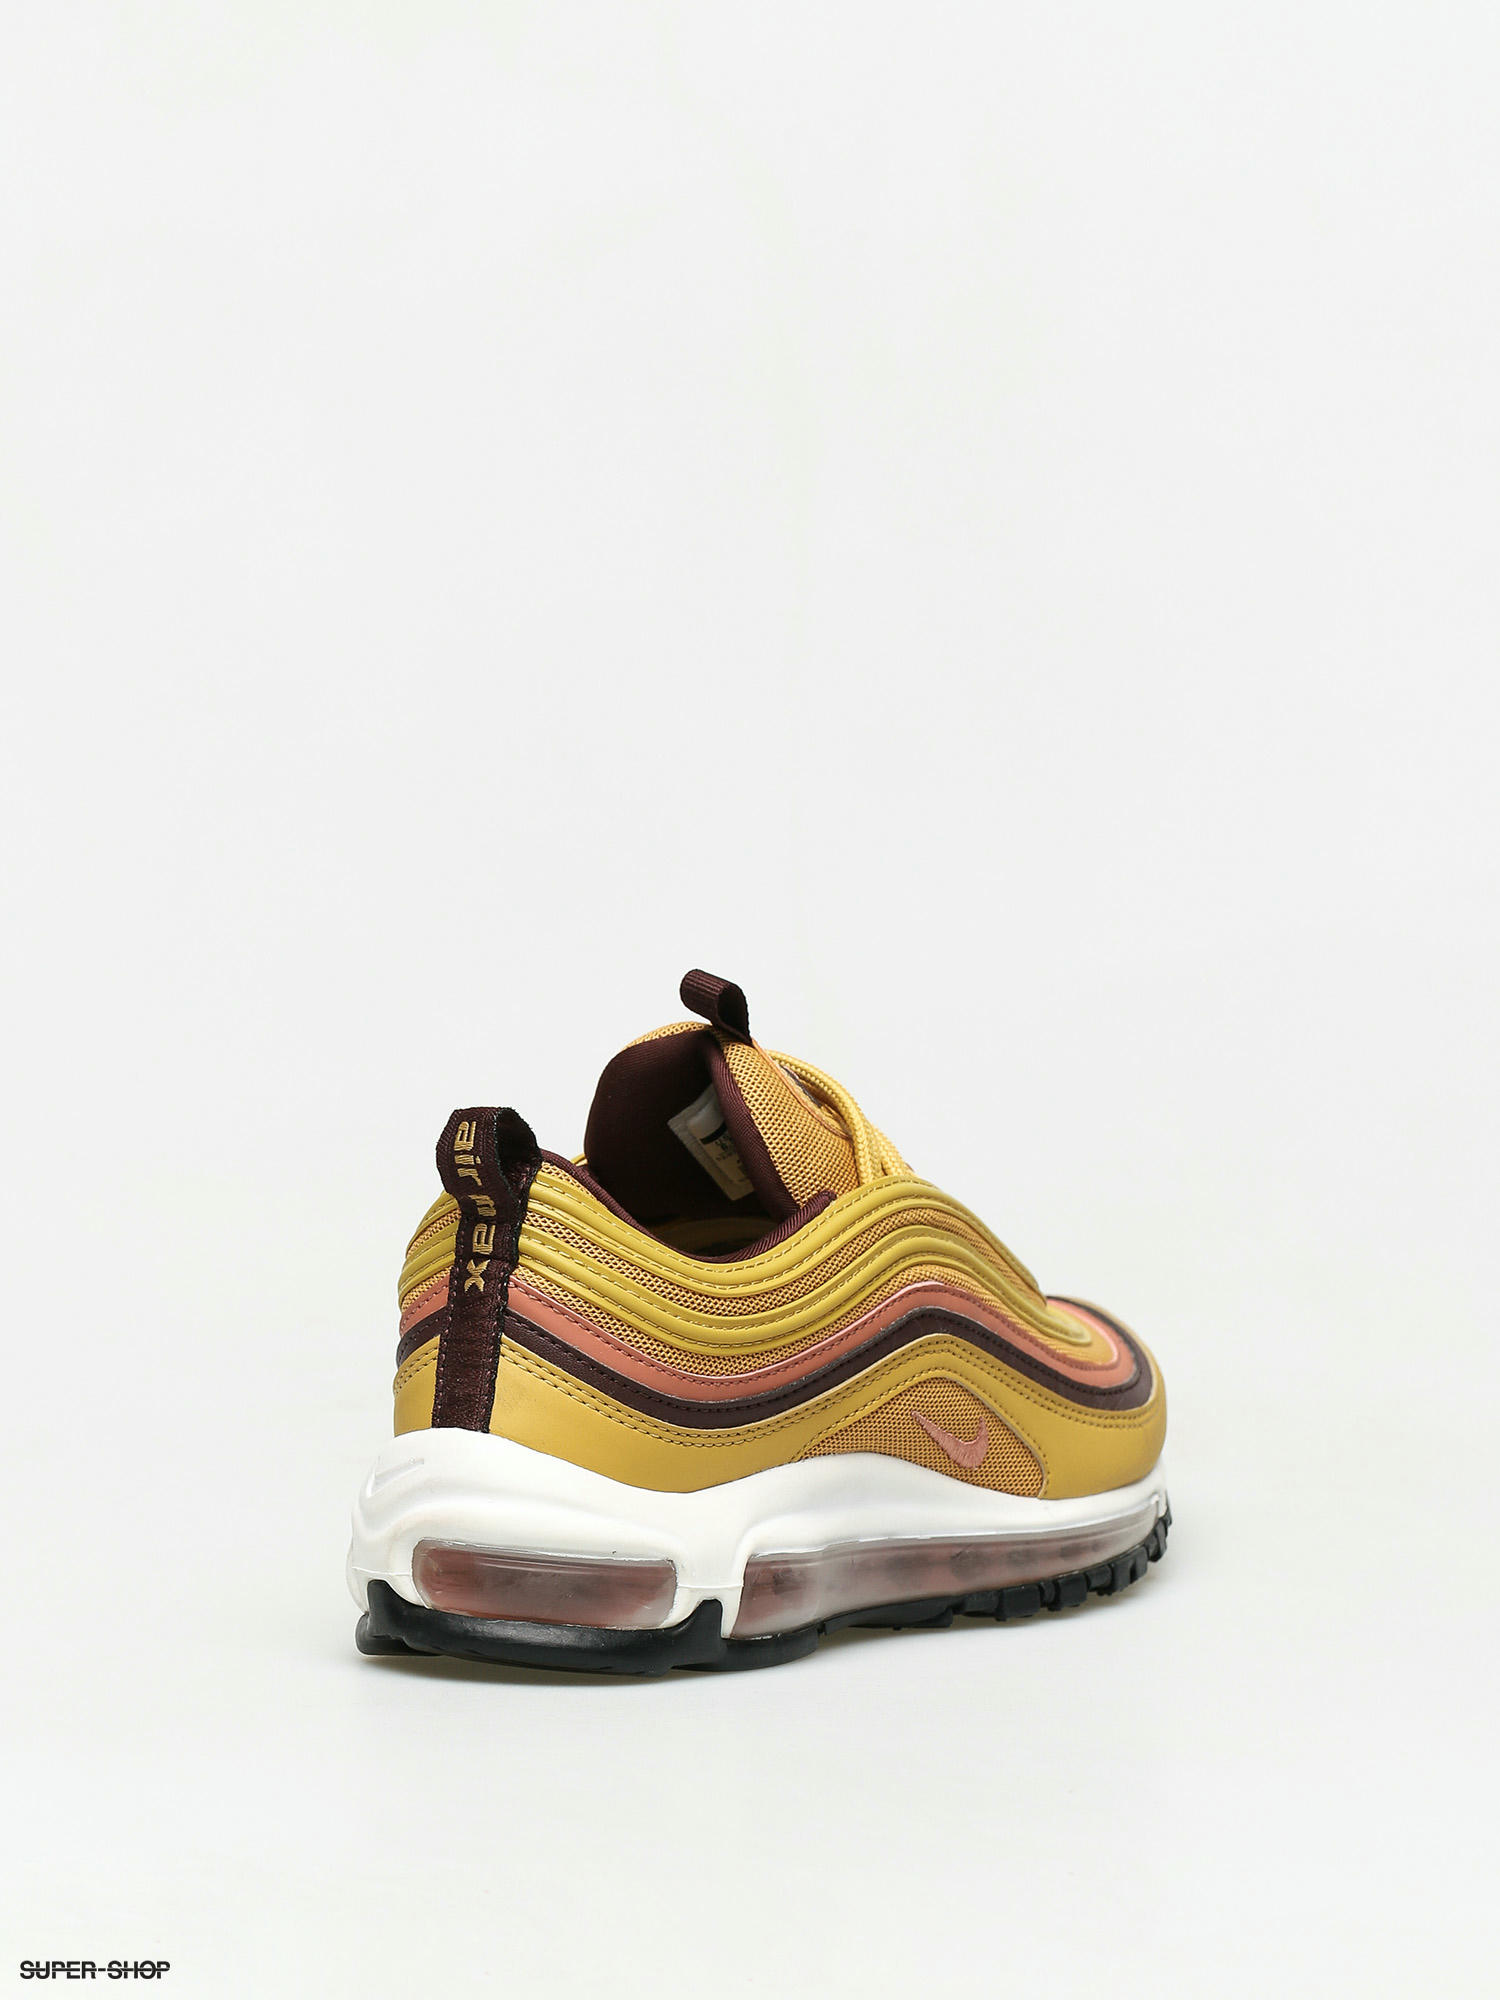 burgundy and gold air max 97